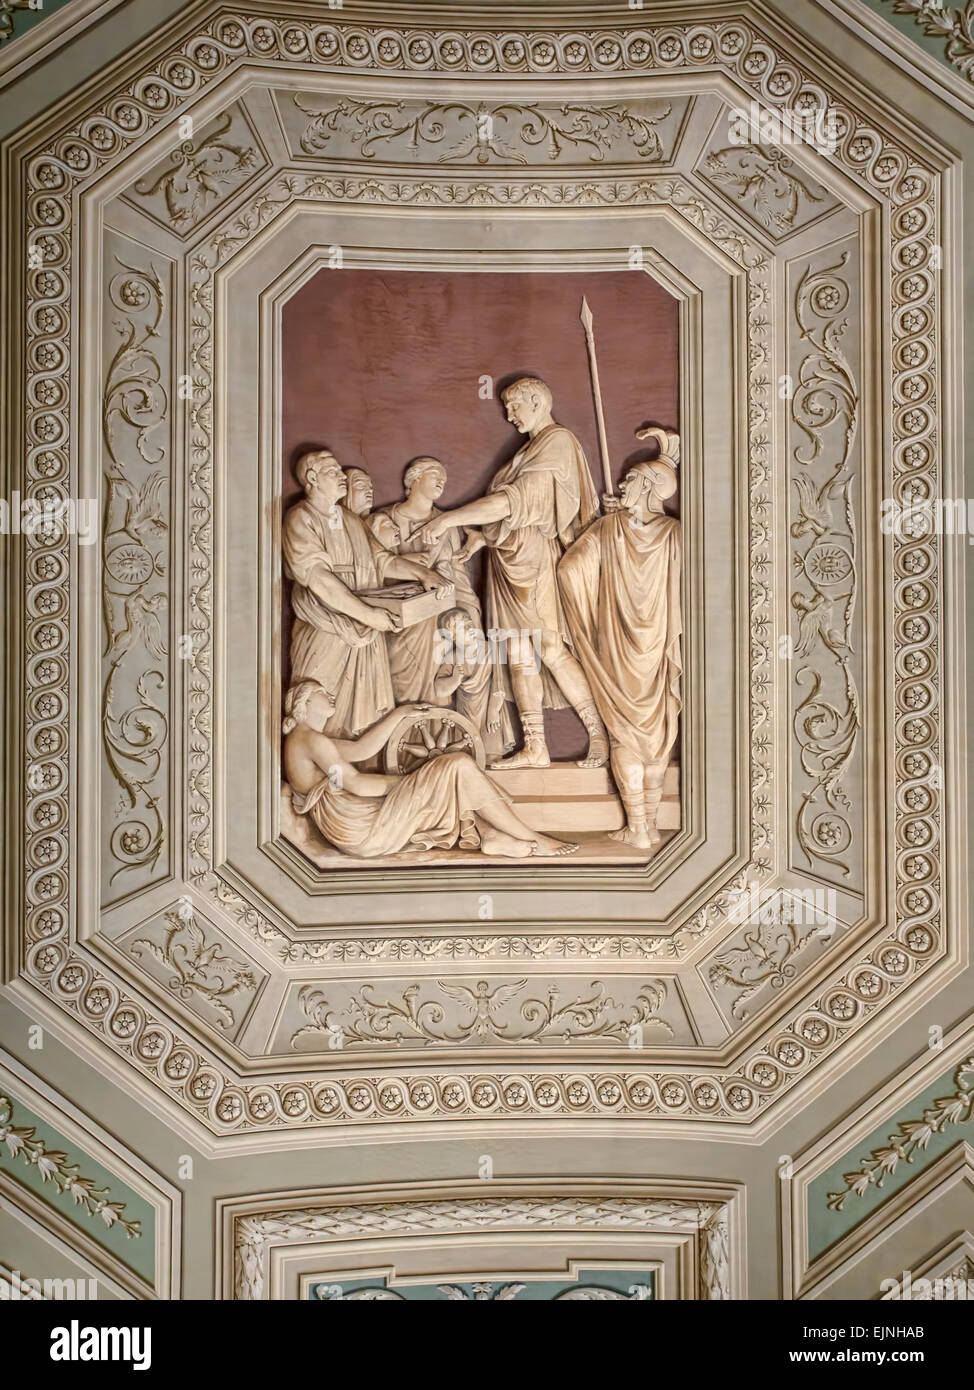 Rome, Italy, Vatican stone relief carving ceiling Stock Photo